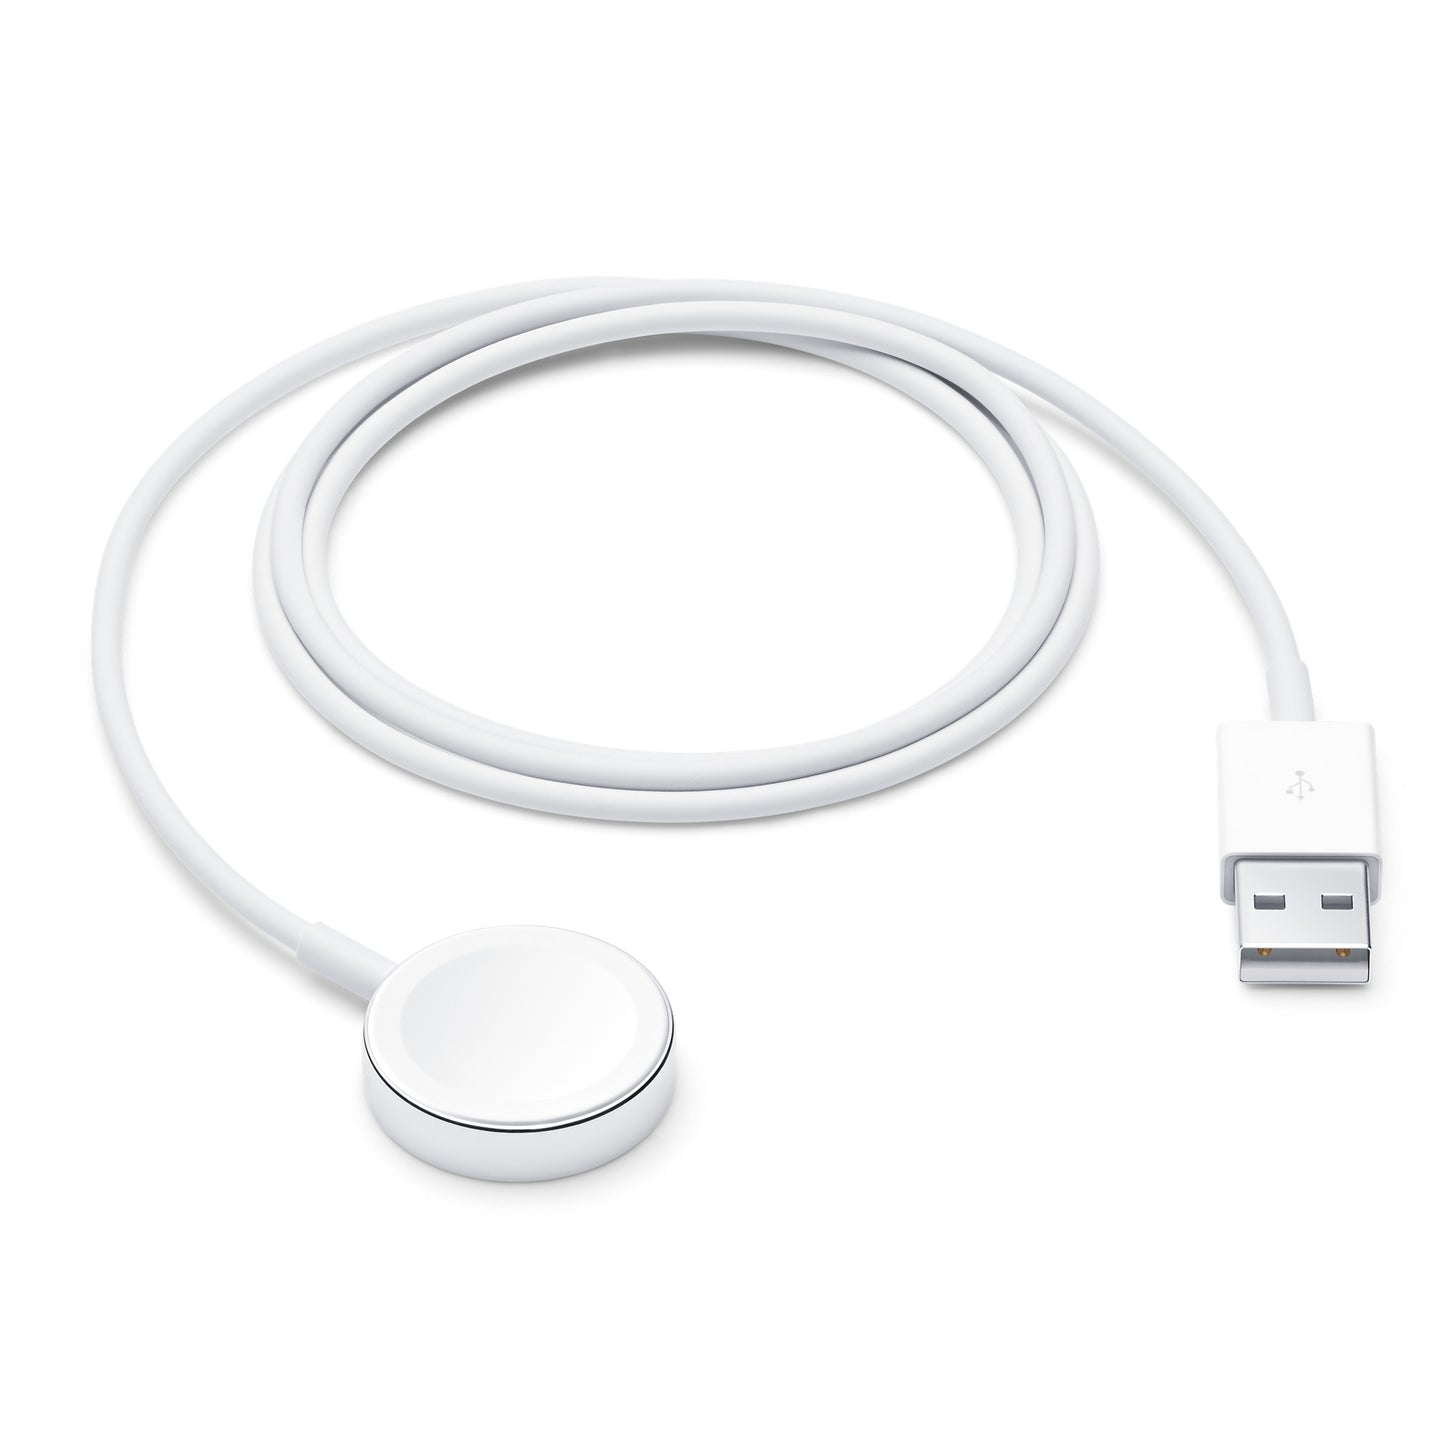 Apple Watch Magnetic Charging Cable w/ USB 3.0 Connector (1m) - 2019